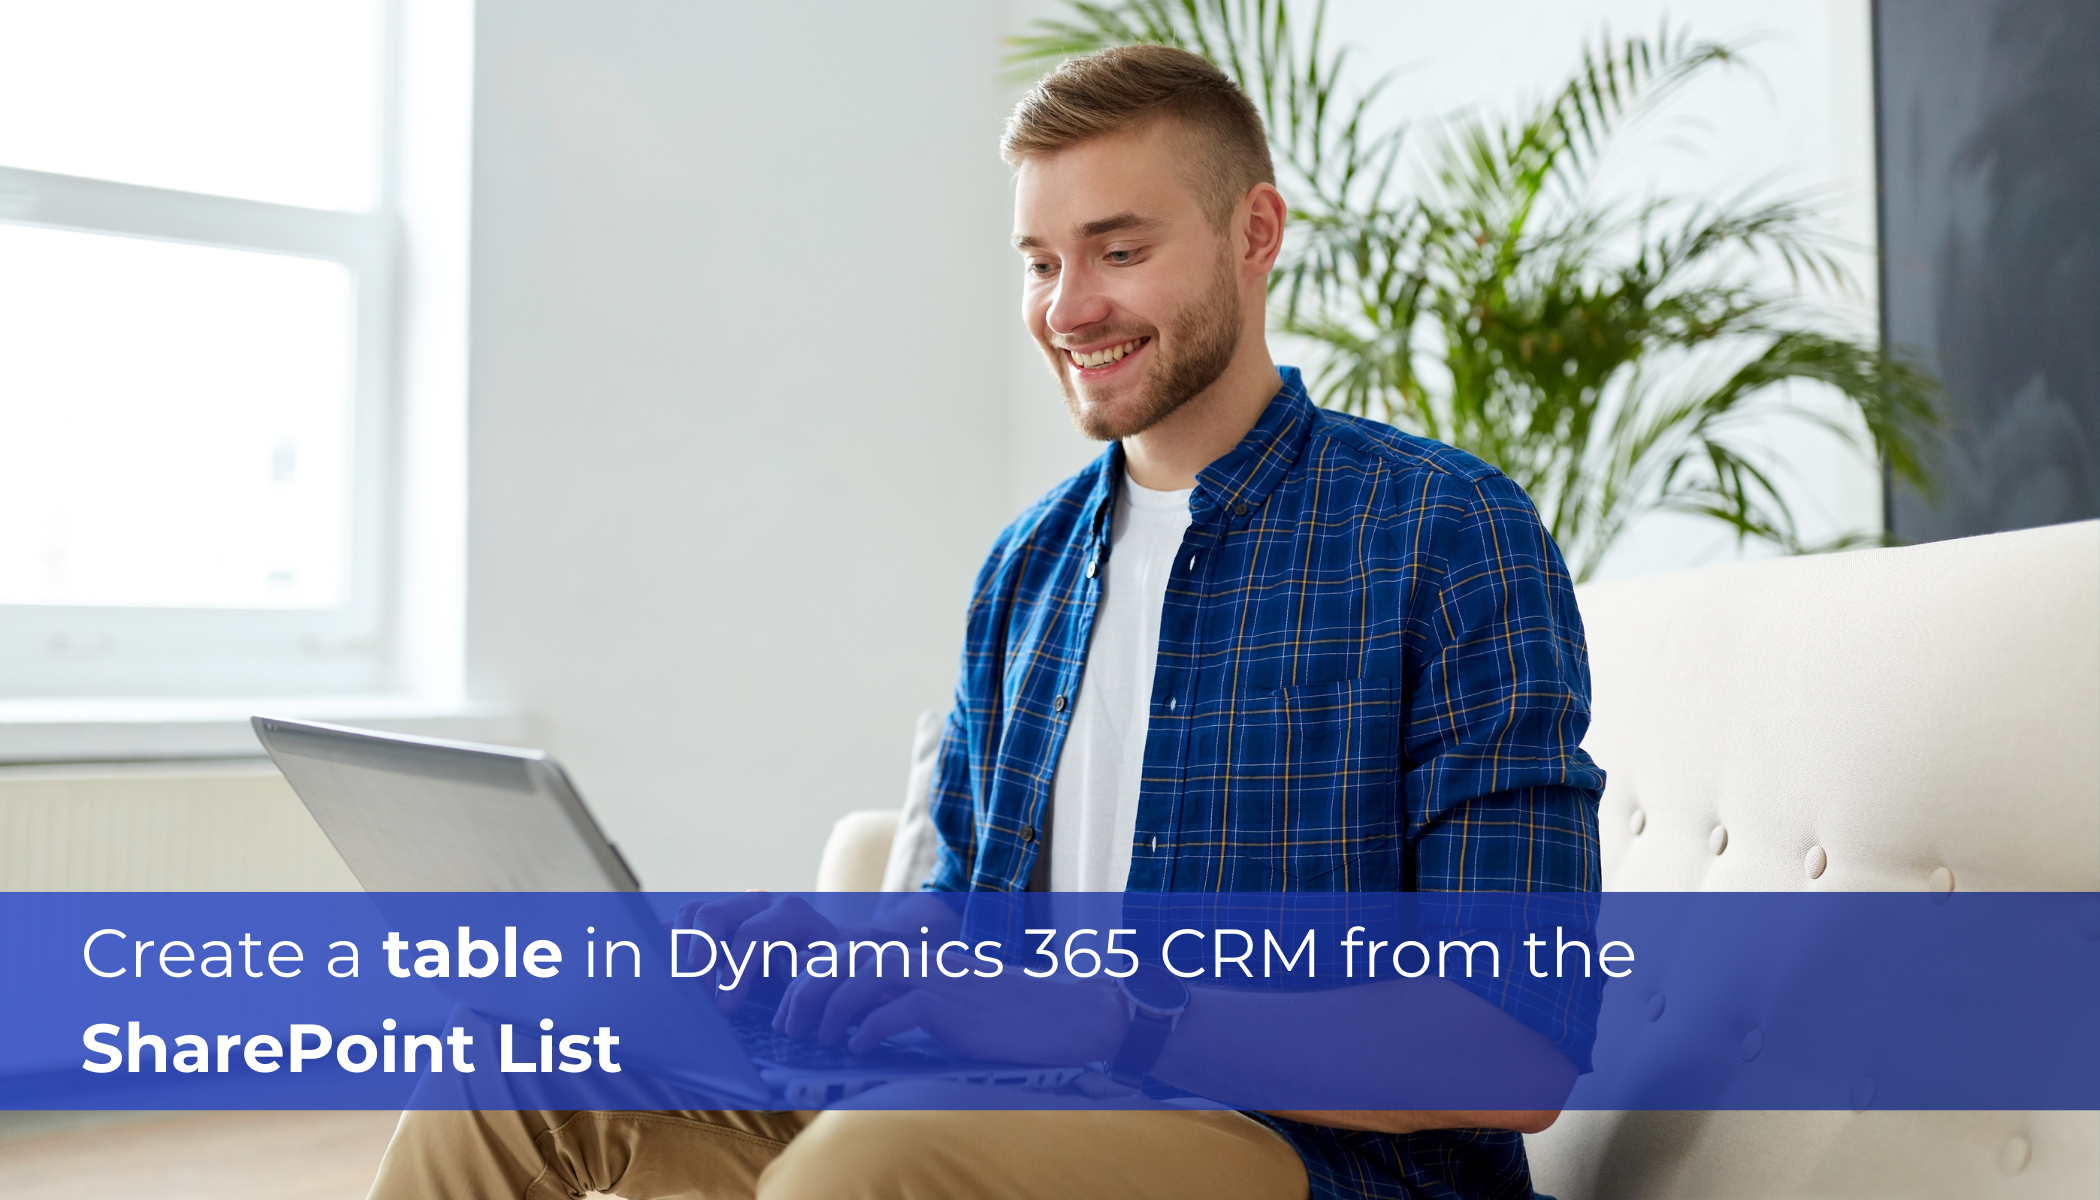 Create a table in Dynamics 365 CRM from the SharePoint List